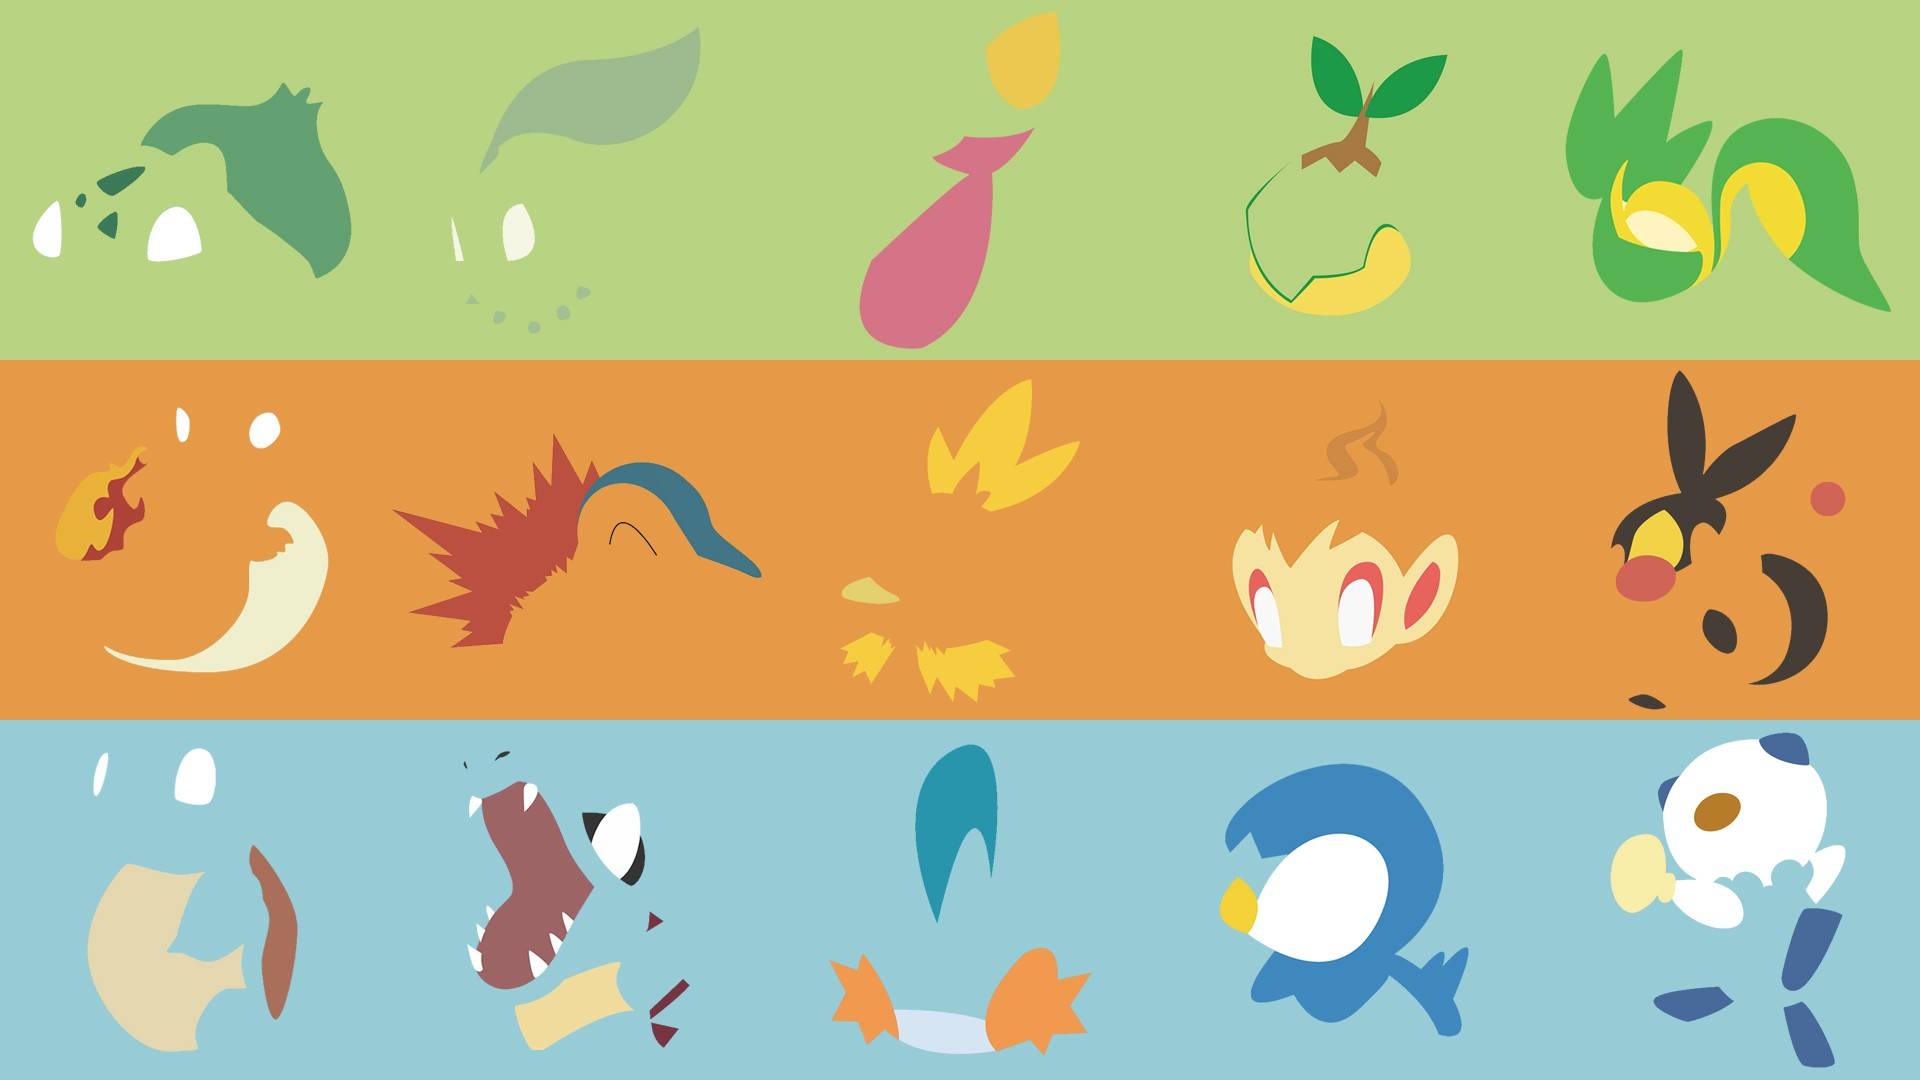 Free download The 3 Starter From oldest to latest Pokemon Wallpaper [1920x1080] for your Desktop, Mobile & Tablet. Explore Pokemon Starters Wallpaper. Cool Pokemon Wallpaper HD, Pokemon Fennekin Wallpaper, Pokemon XY Wallpaper